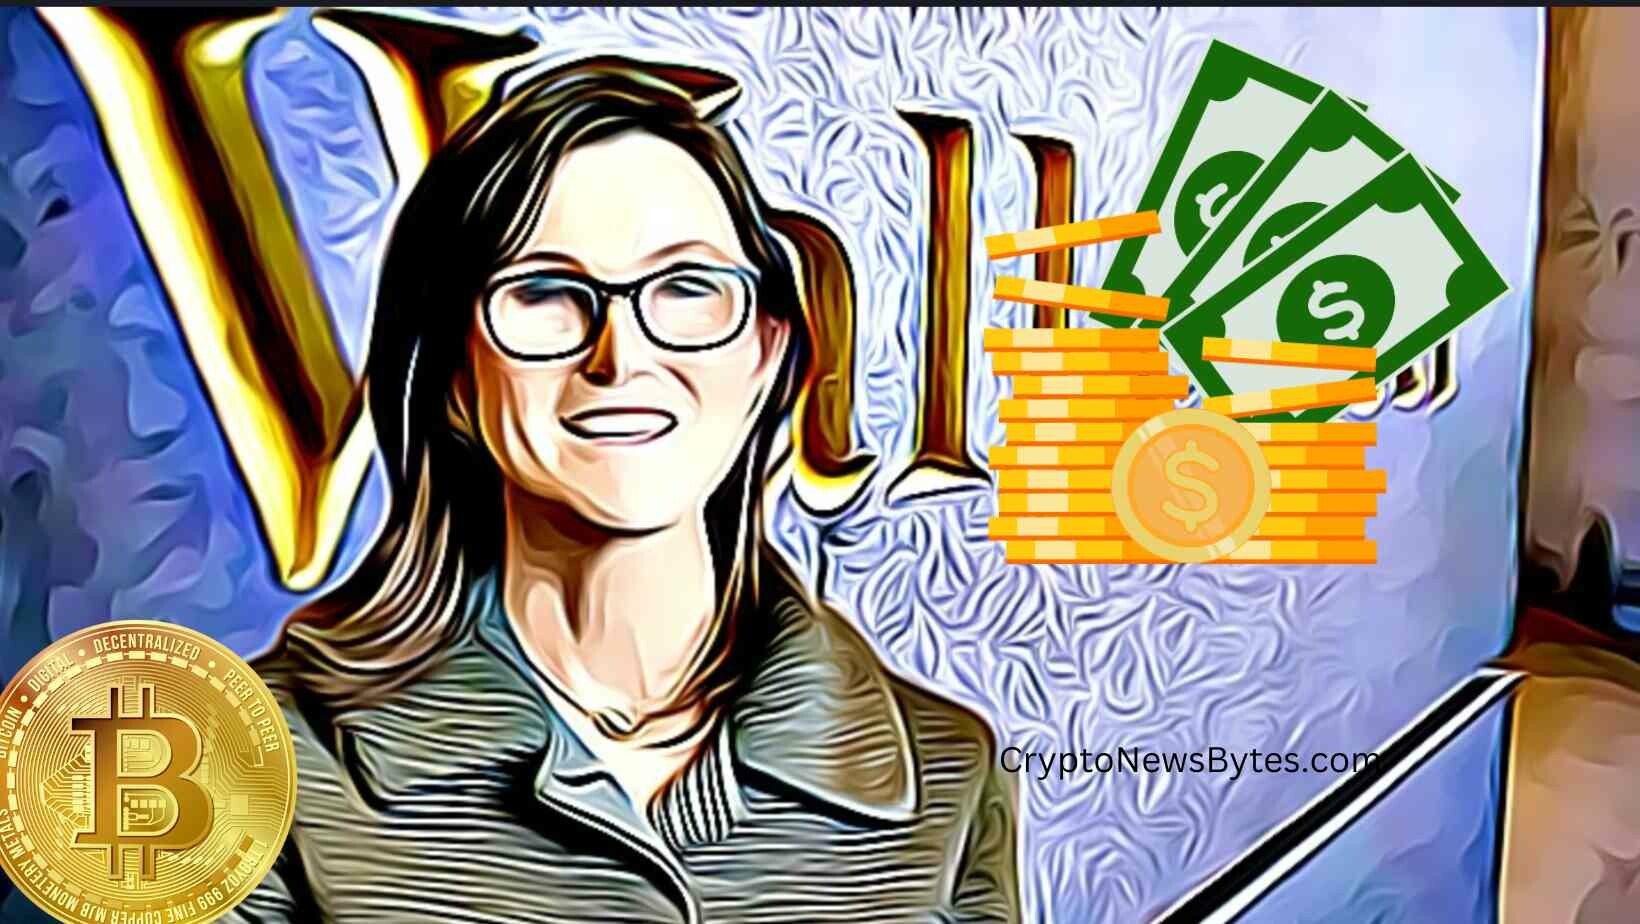 CRYPTONEWSBYTES.COM Cathie-Wood-crypto Cathie Wood Predicts Meteoric Rise in Bitcoin Price Amid Potential Loss of Confidence in Monetary System  